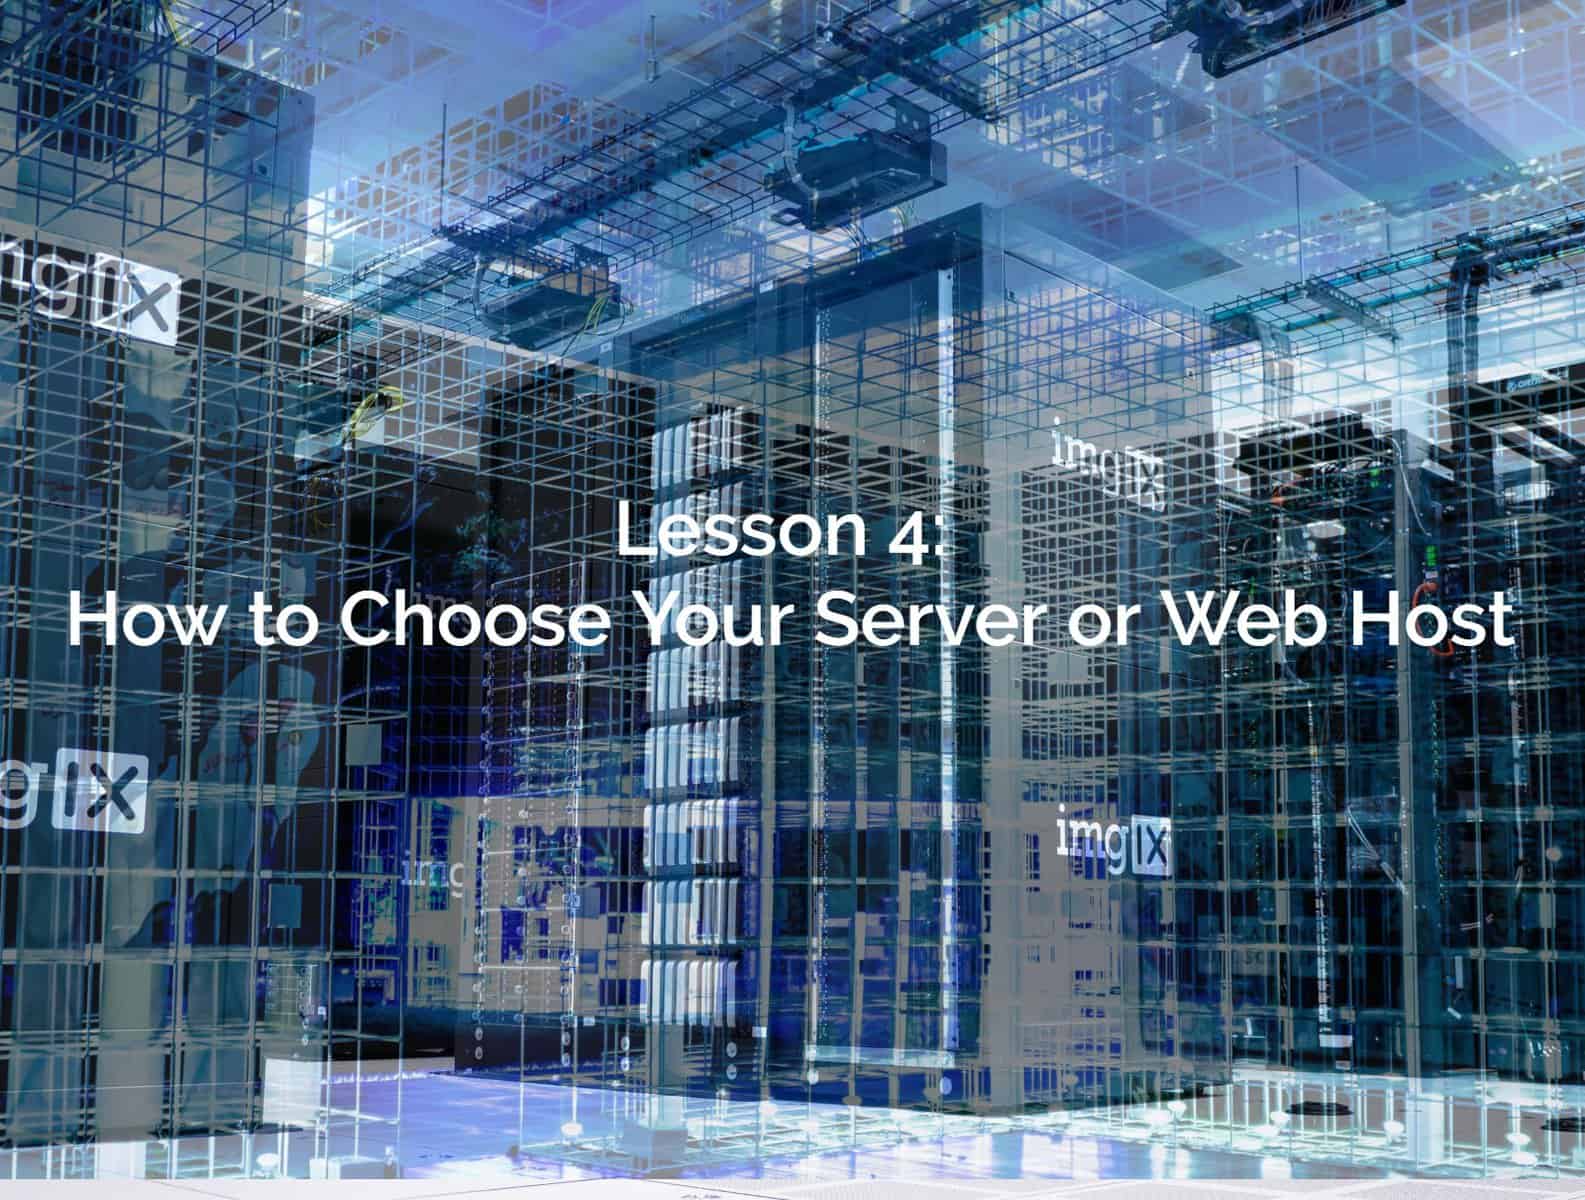 Lesson 4: How to Choose Your Server or Web Host